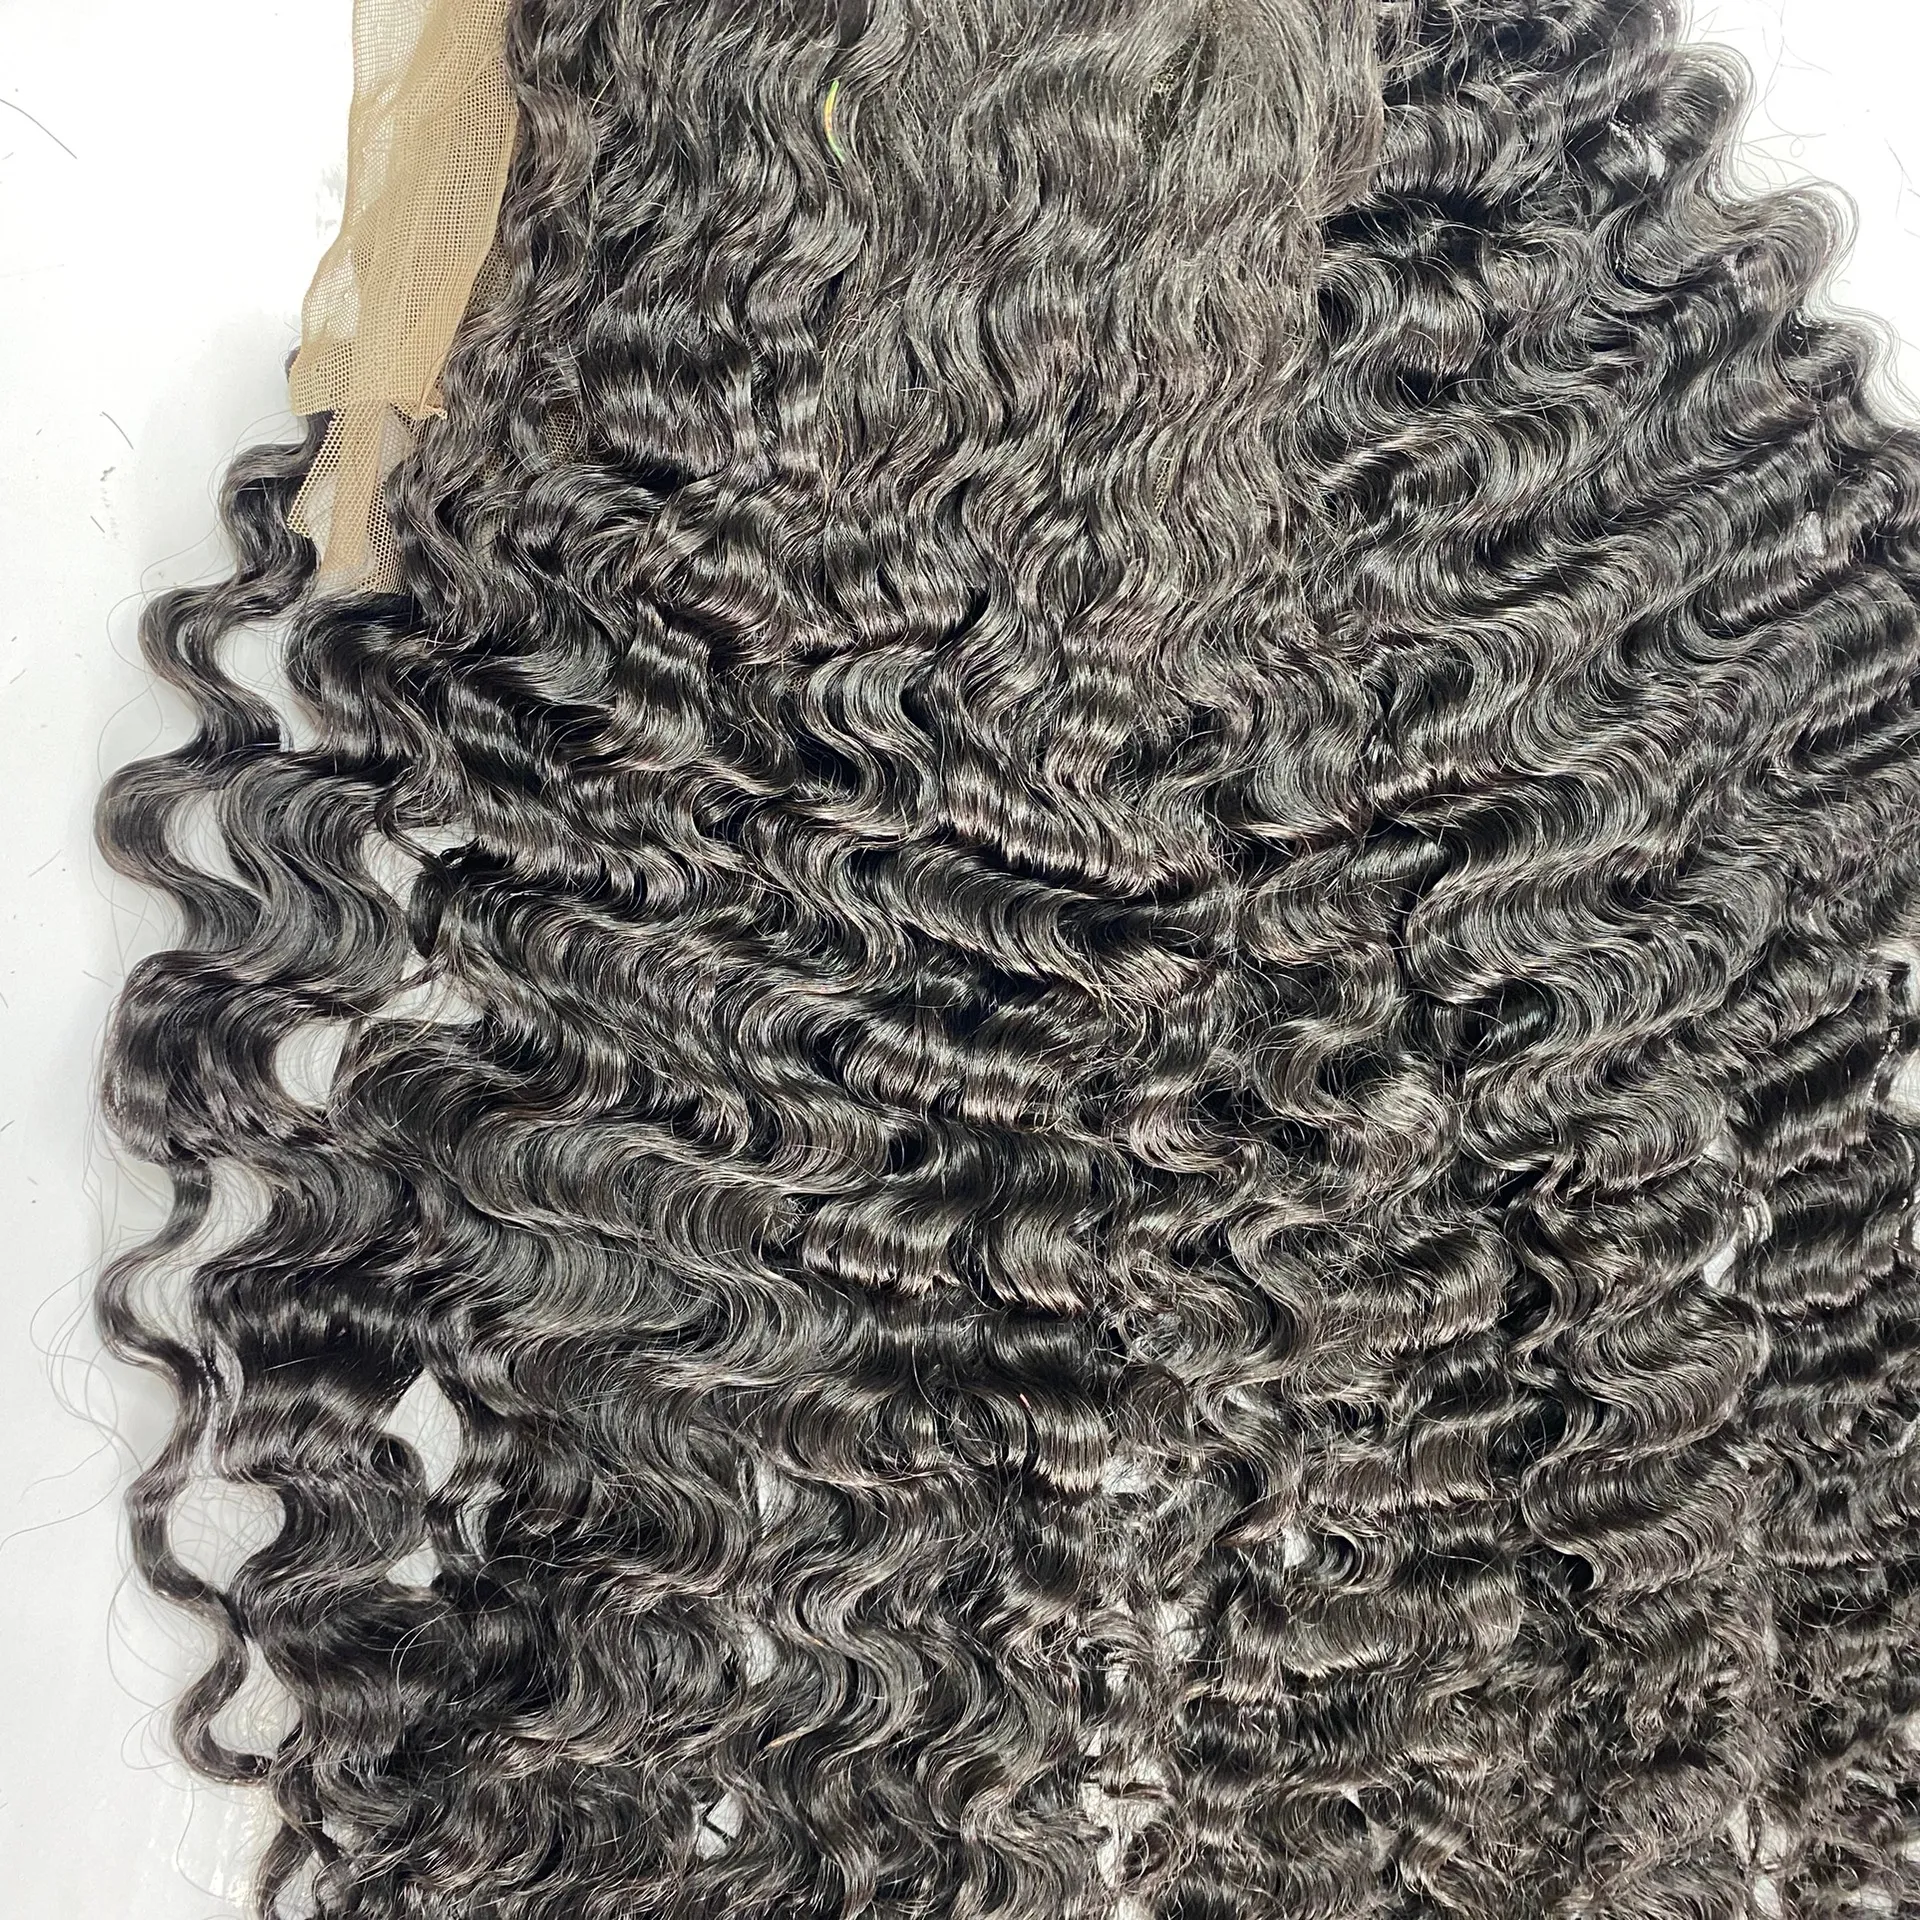 Burmese Curly texture detailed photo Vietnam hair single donor raw cuticle aligned refund policy